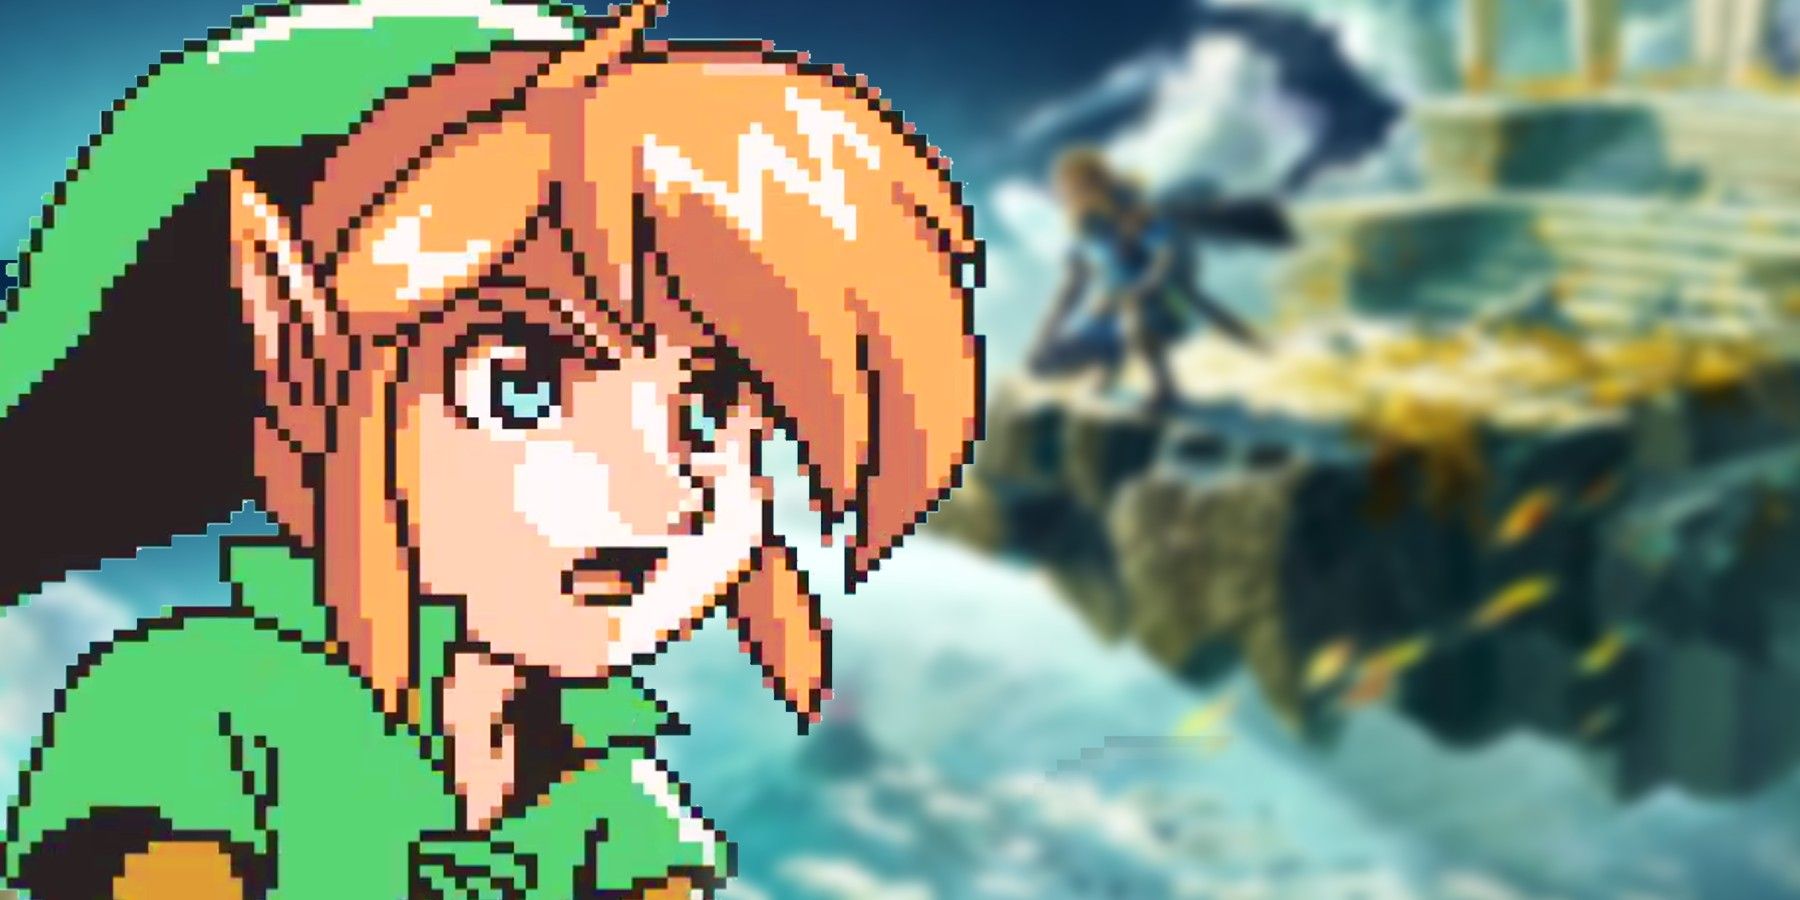 Link as he appears in promo materials for Zelda: Oracle games.